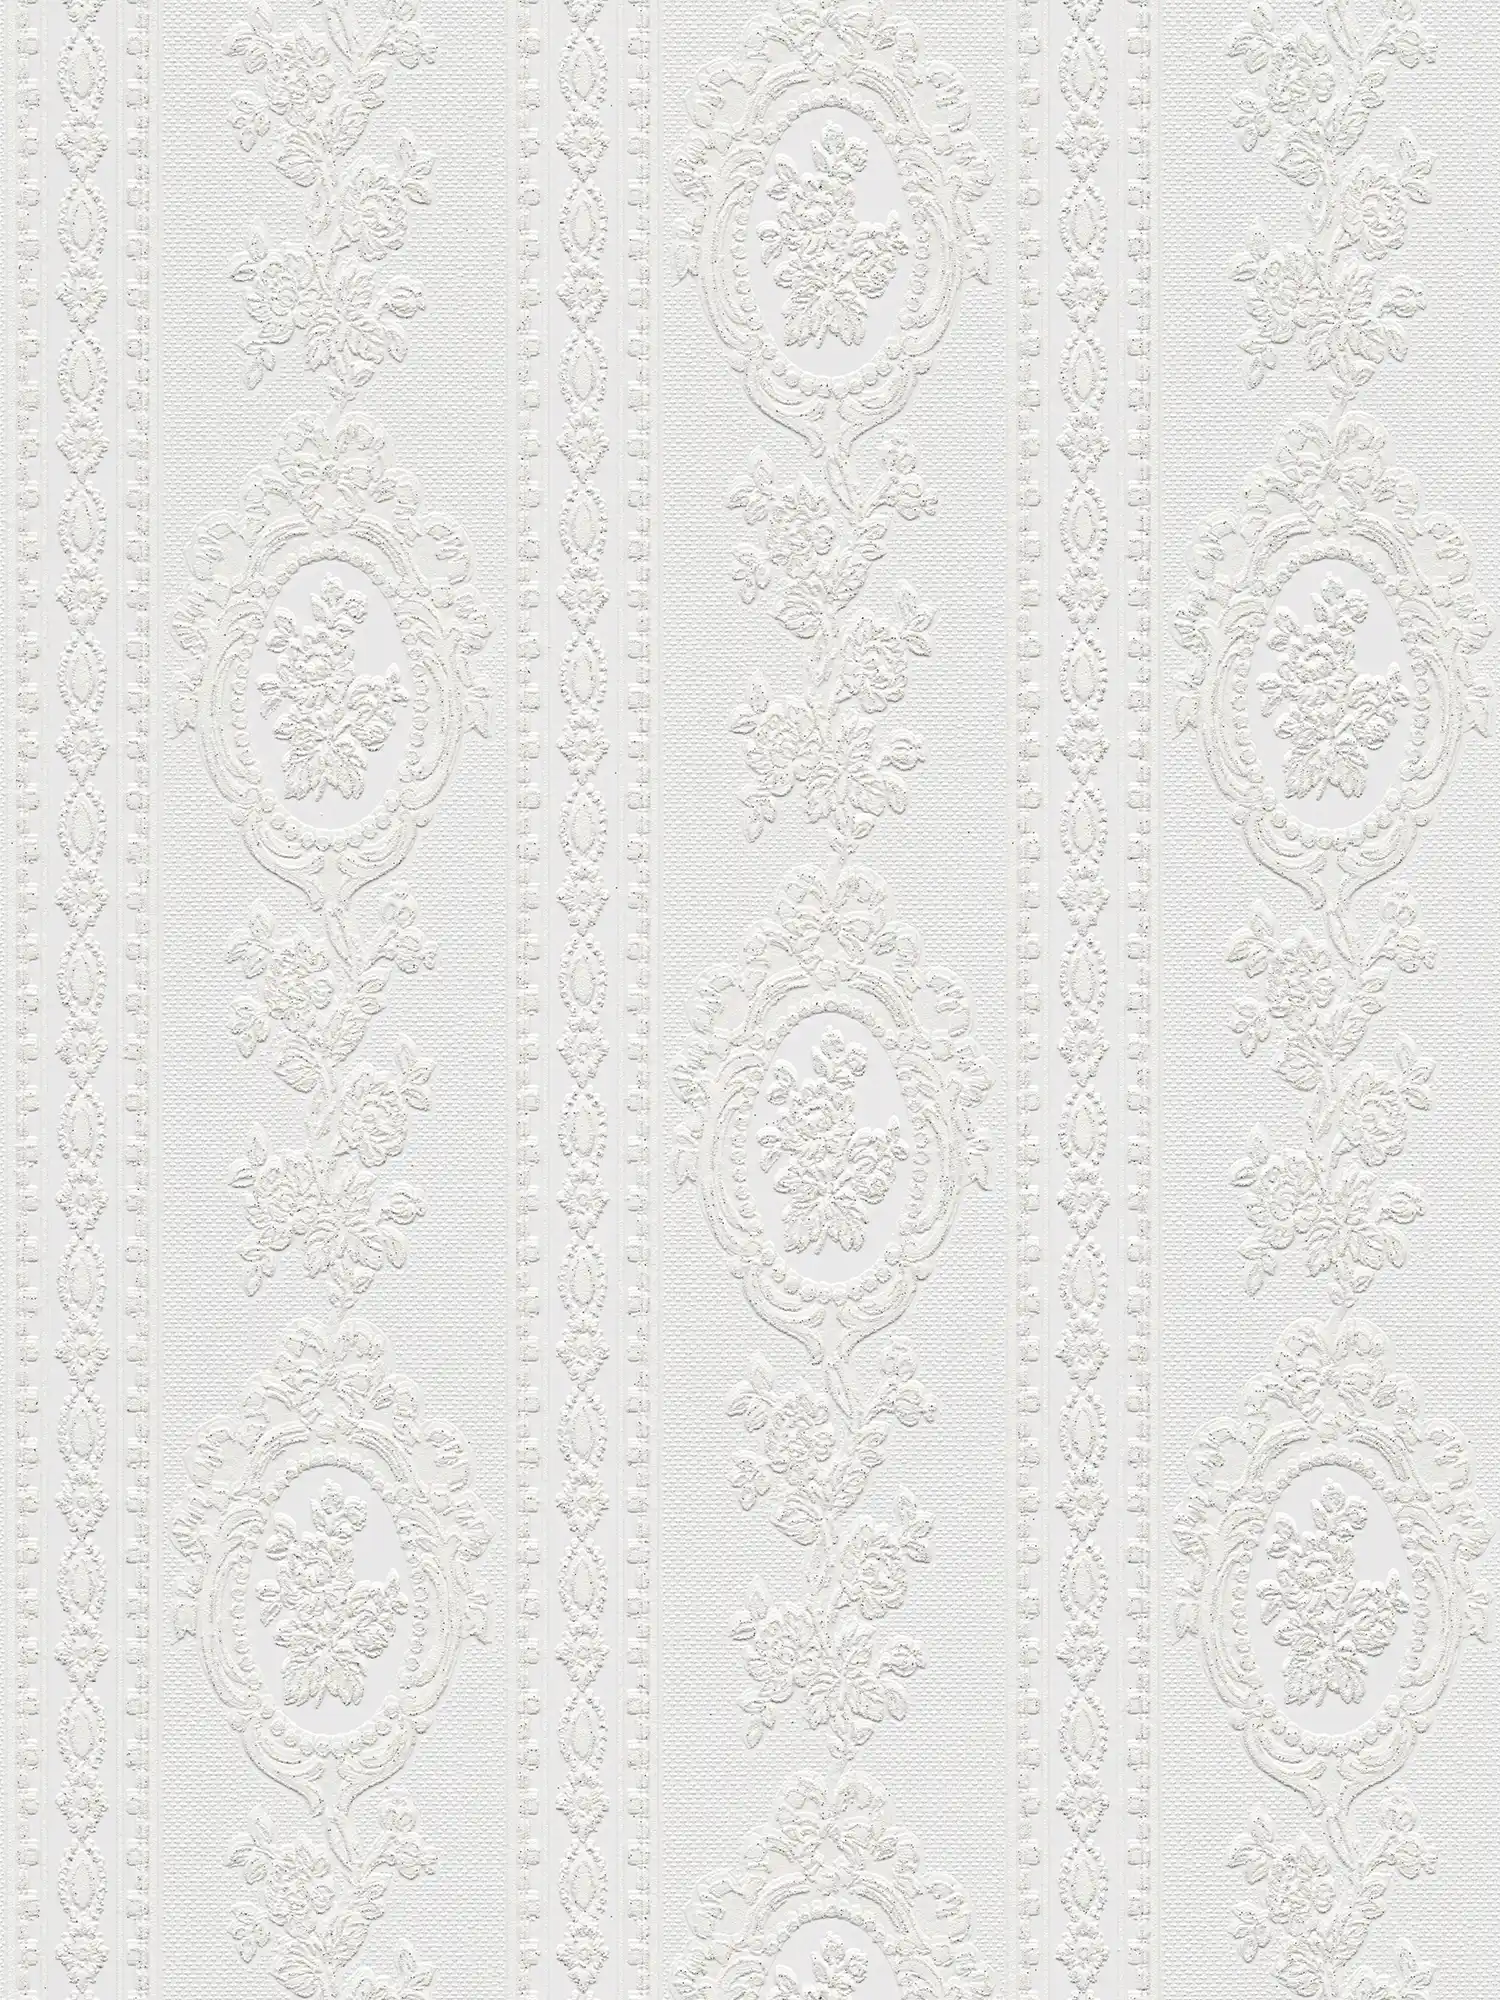 Ornamental wallpaper floral elements, stripes and flowers - white
